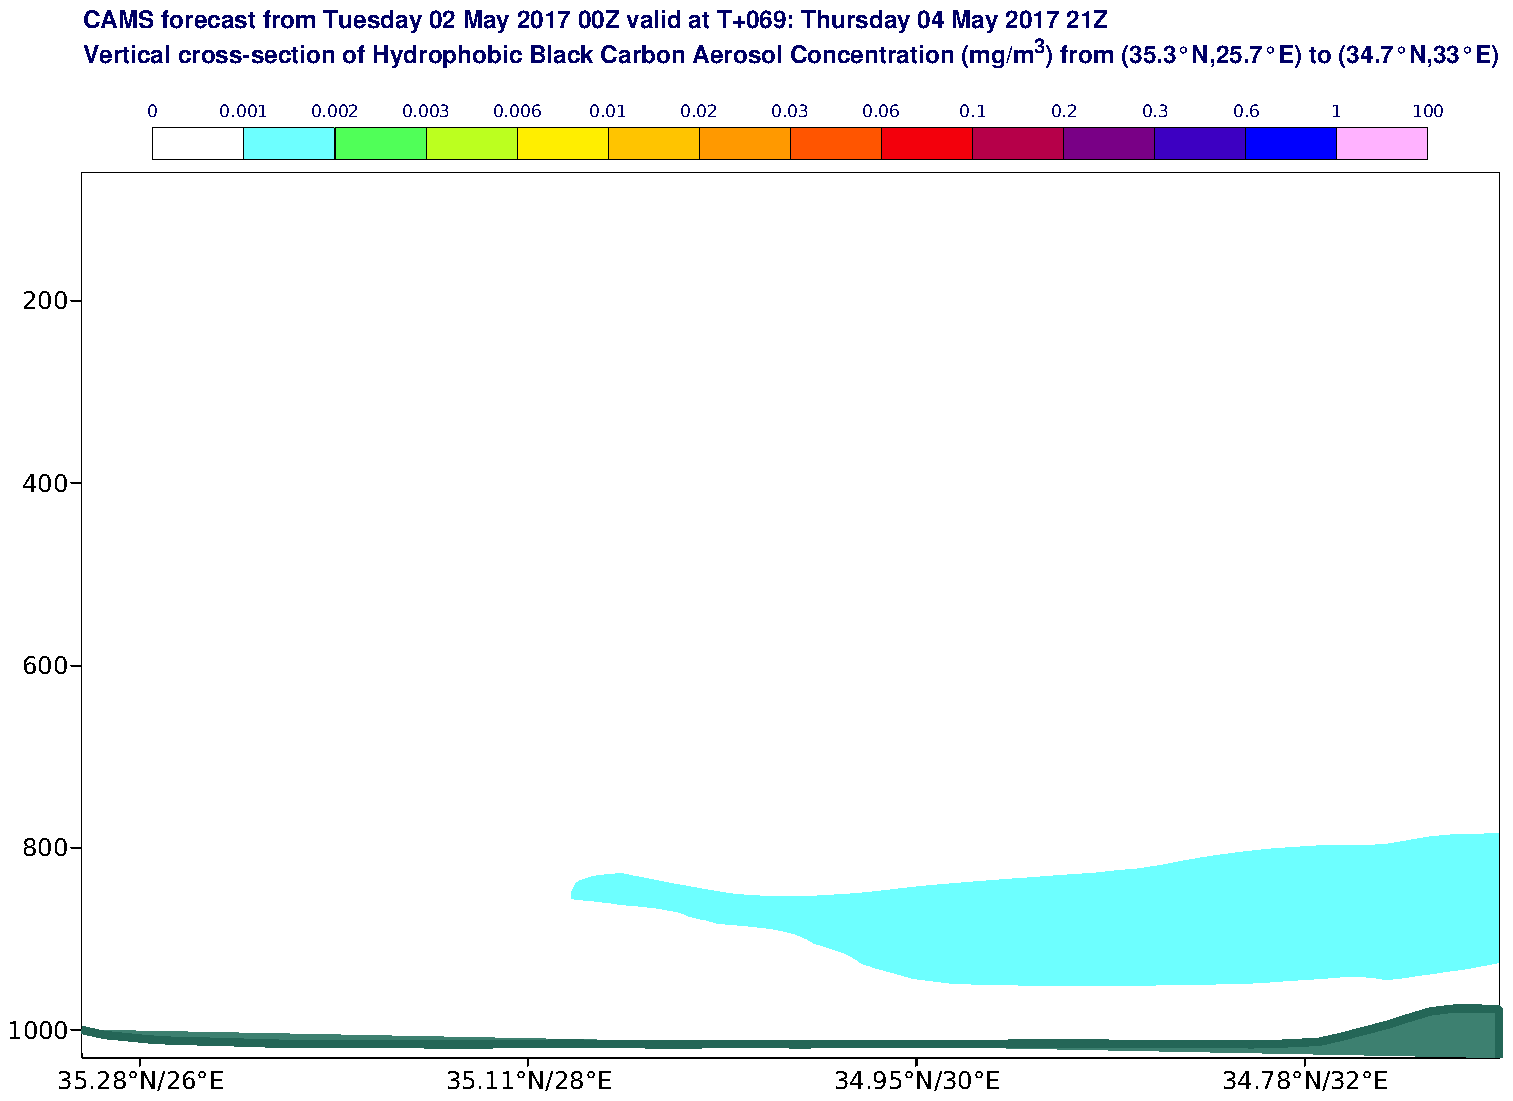 Vertical cross-section of Hydrophobic Black Carbon Aerosol Concentration (mg/m3) valid at T69 - 2017-05-04 21:00